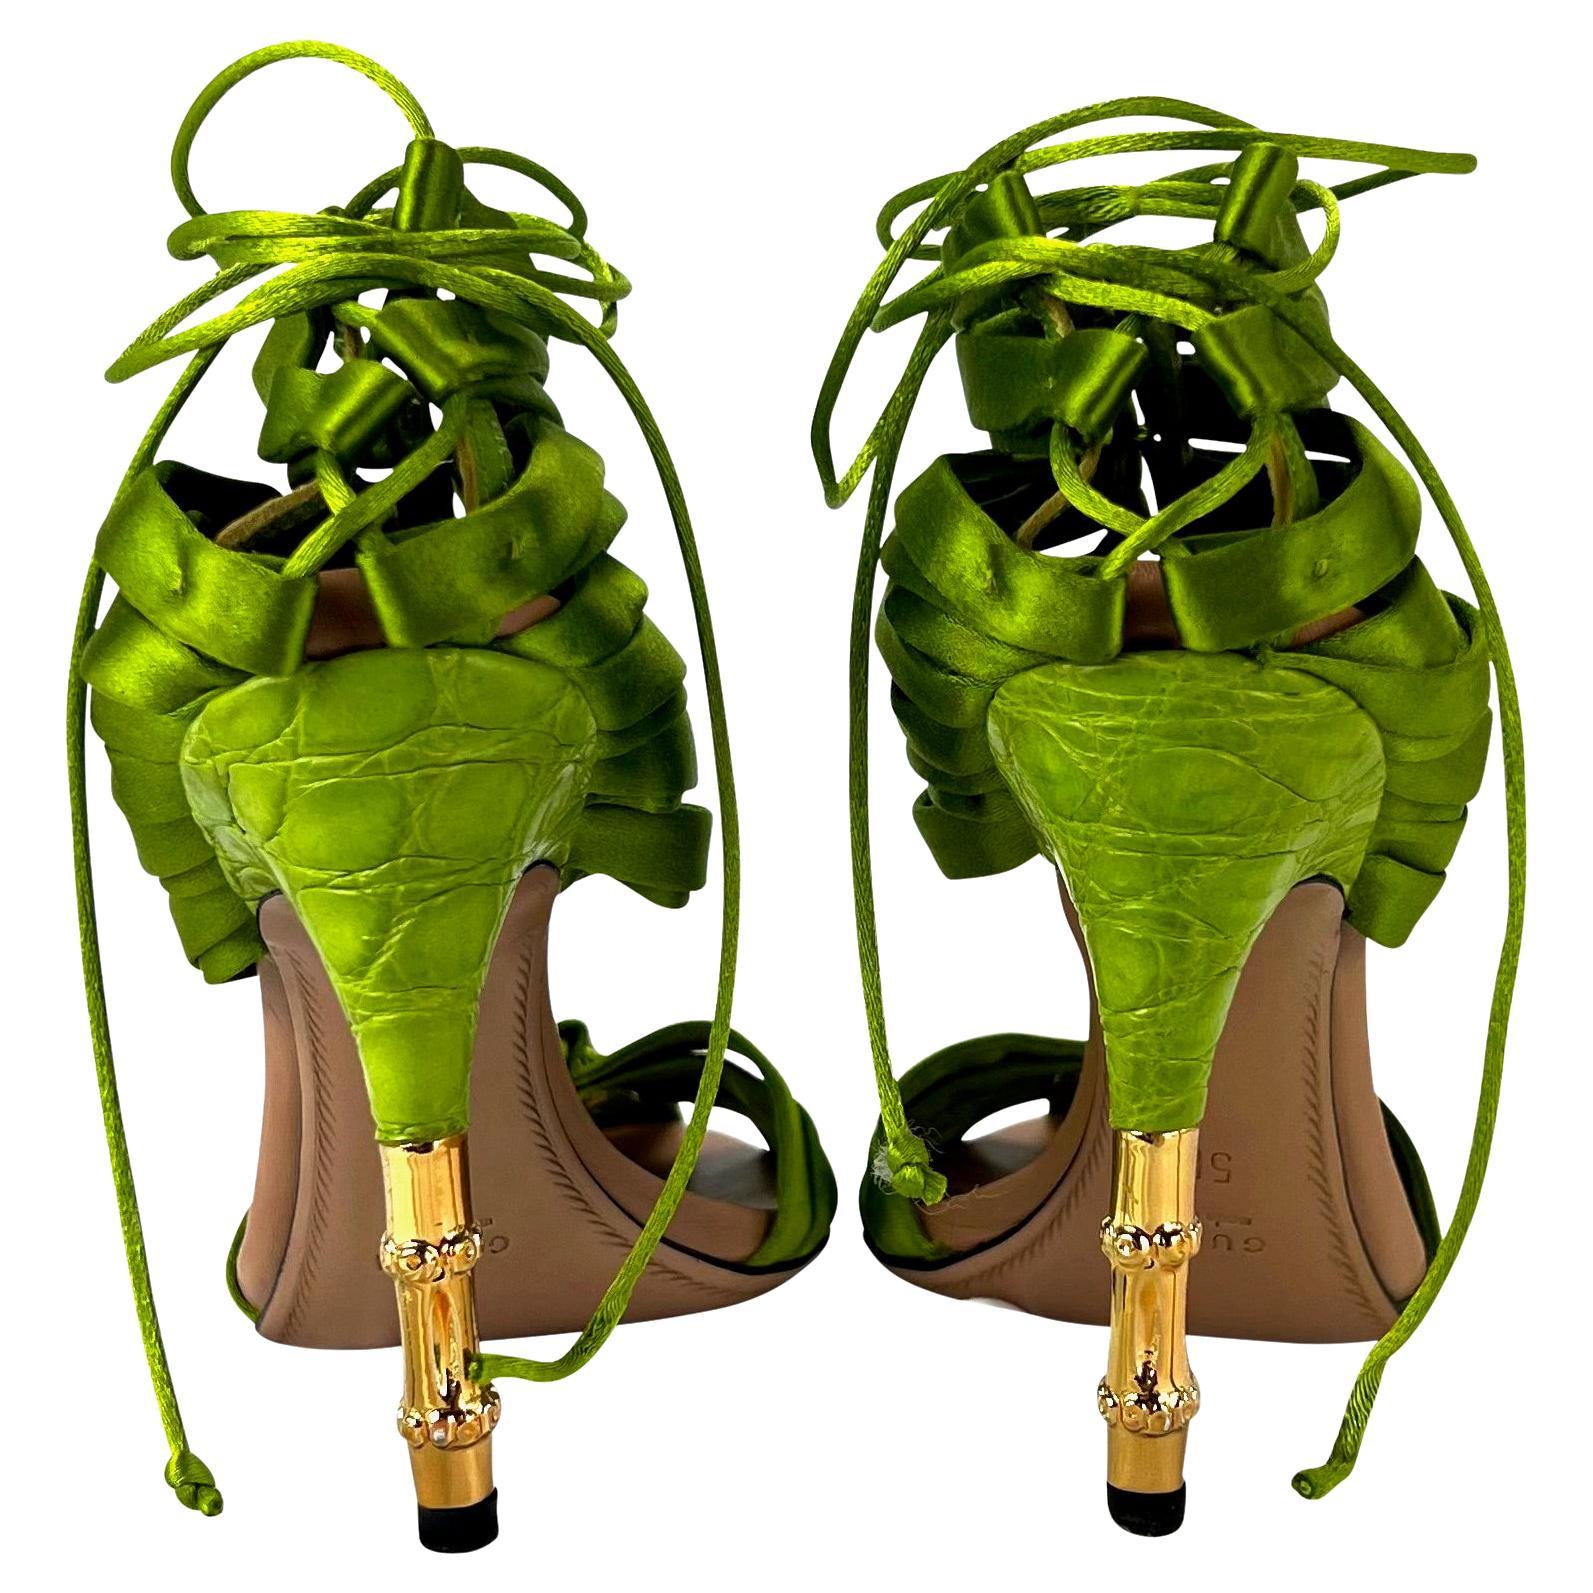 S/S 2004 Gucci by Tom Ford Ad Green Satin Strap Lace-Up Crocodile Heels Size 5 B For Sale 3